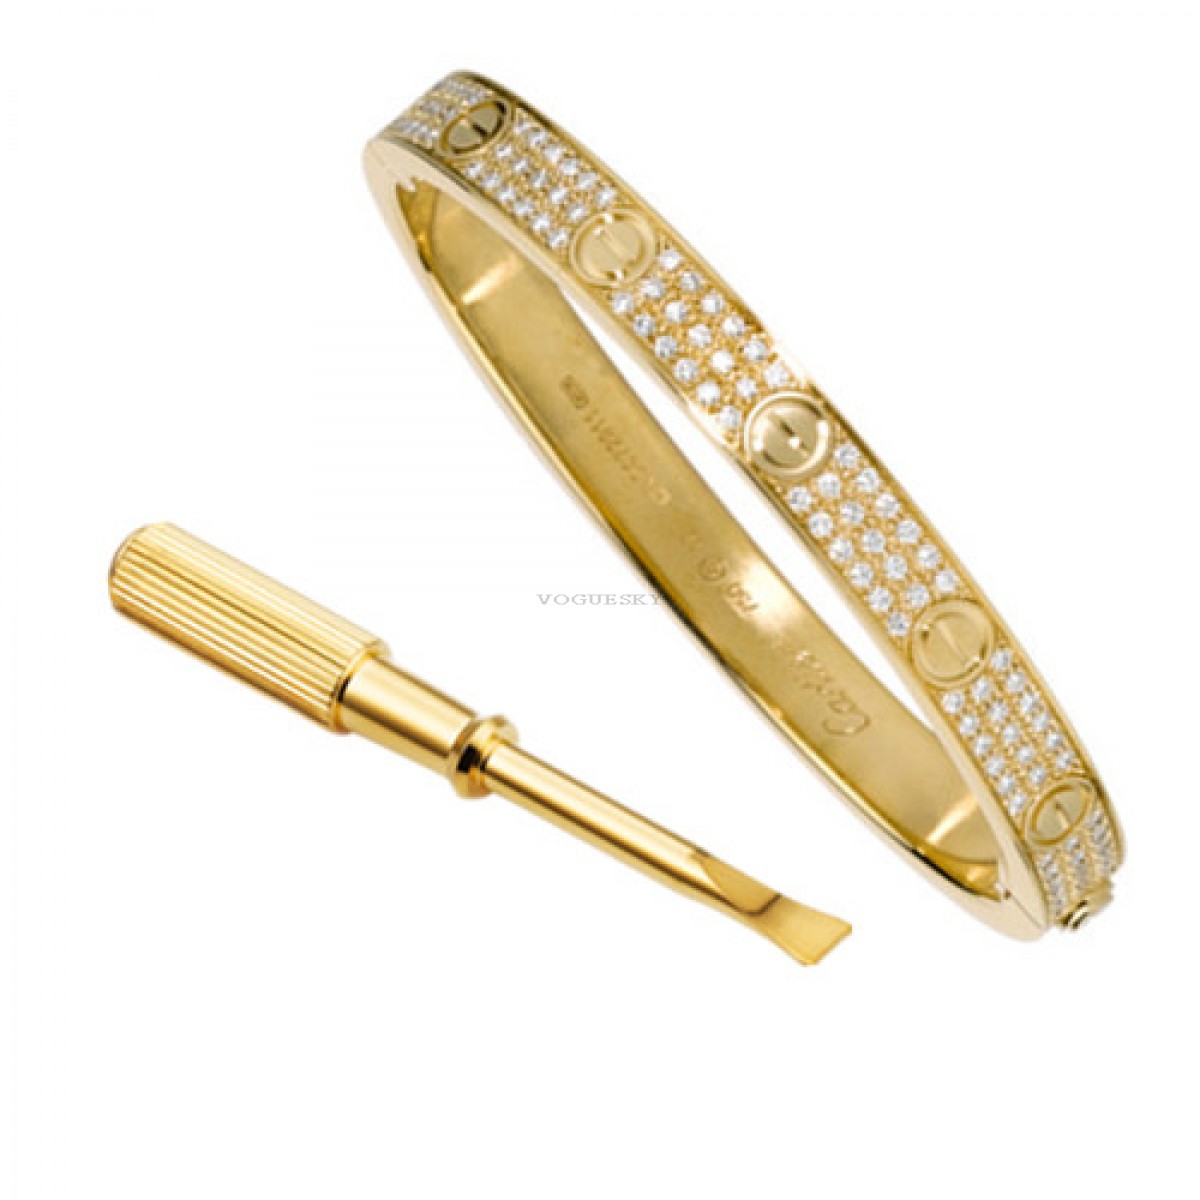 Designer Love Gold Bracelet With Alloy Armband For Women And Men 18K Plated  Nail Braces In Gold, Silver, And Rose With Diamond Bangle Bracelet Accents  DHL From Rosemengmengc, $2.96 | DHgate.Com